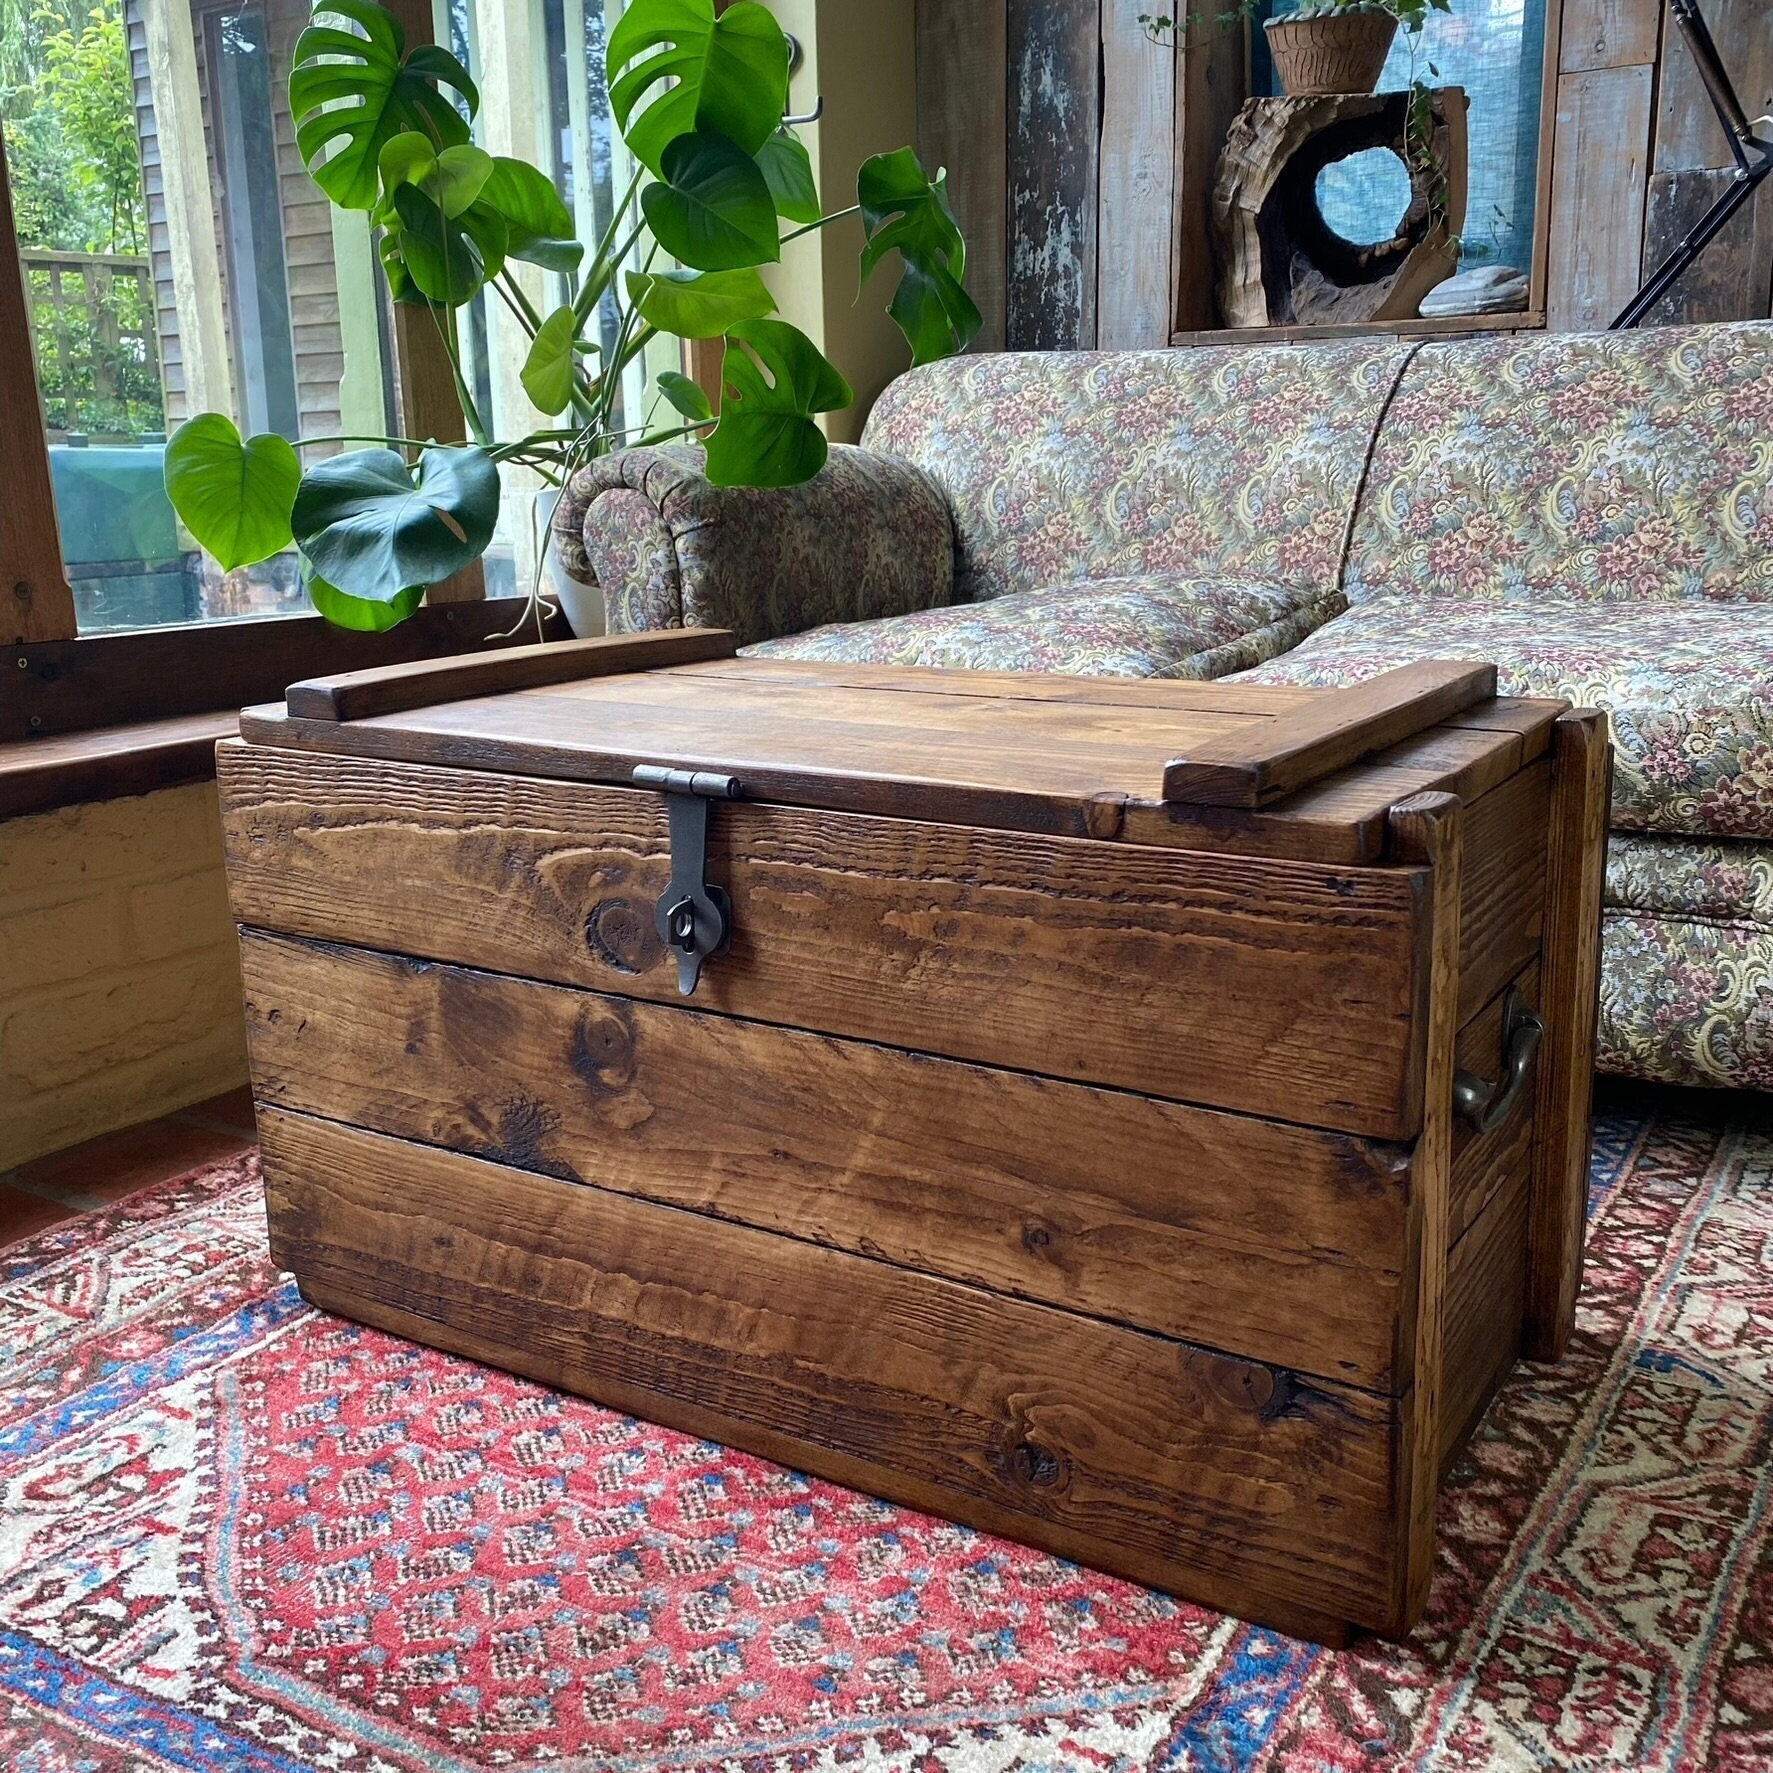 Rustic Wooden TRUNK Chest Coffee Table, Vinyl Record Storage Box, Ottoman